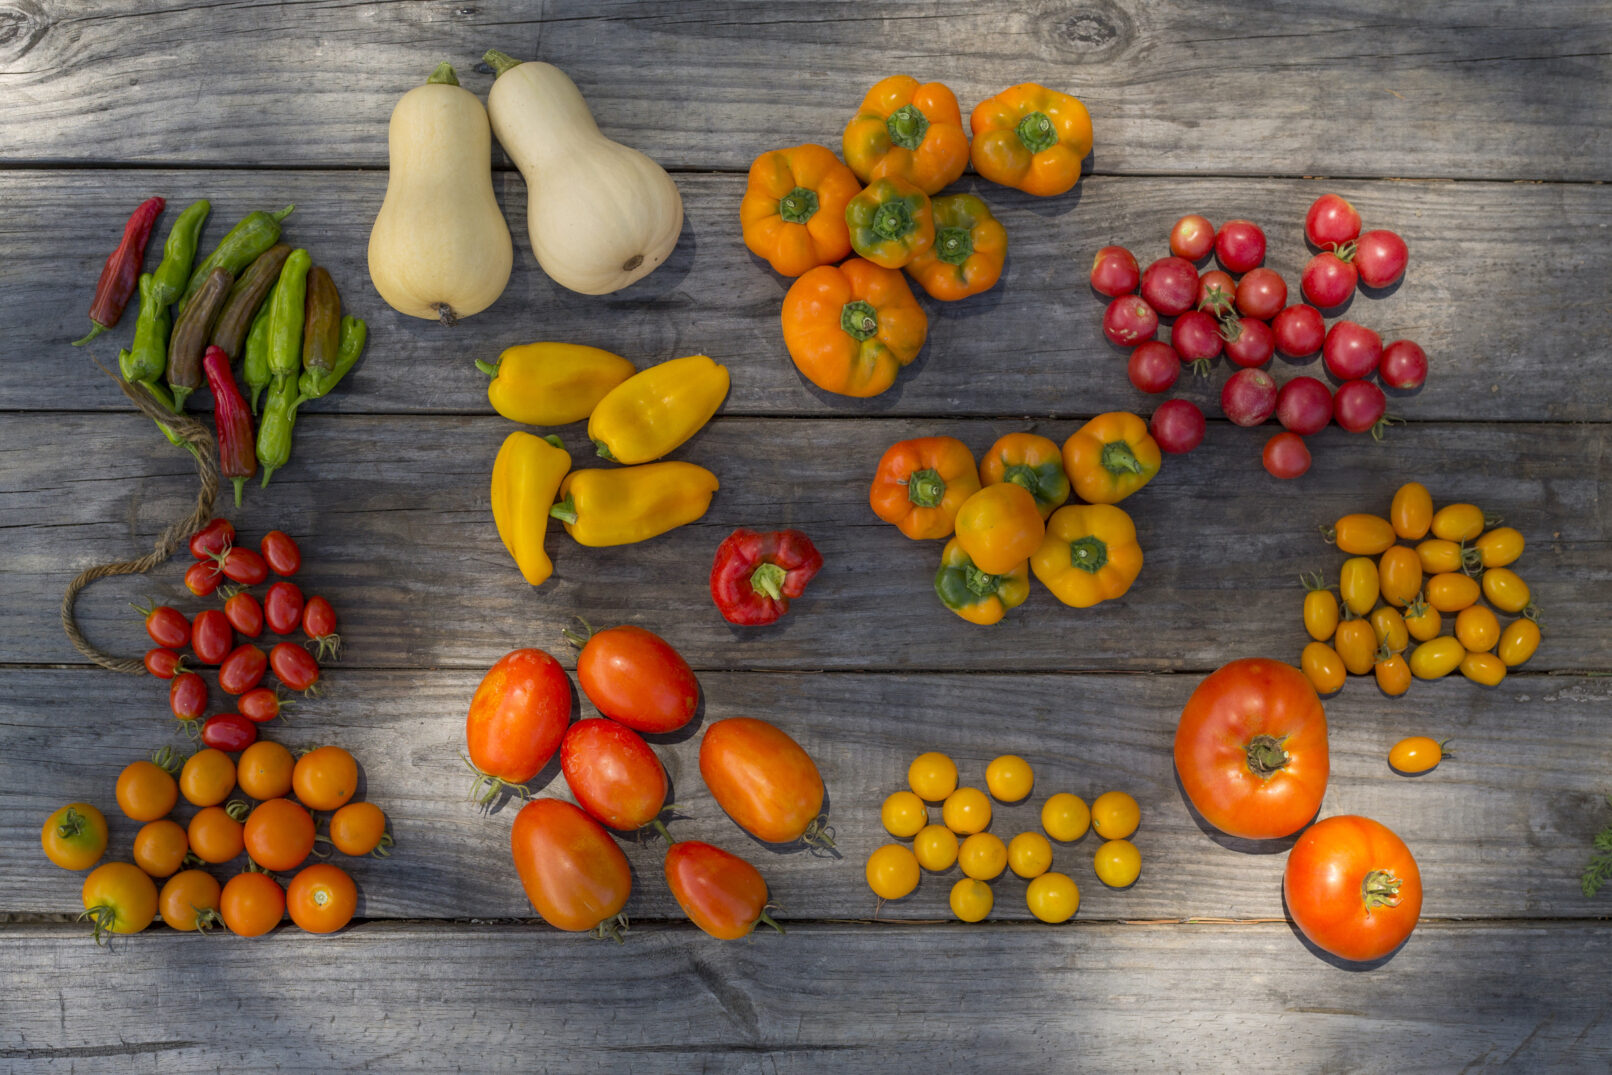 Red, orange and green tomato, squash and peppers in dappled light on a rustic, wood picnic table.